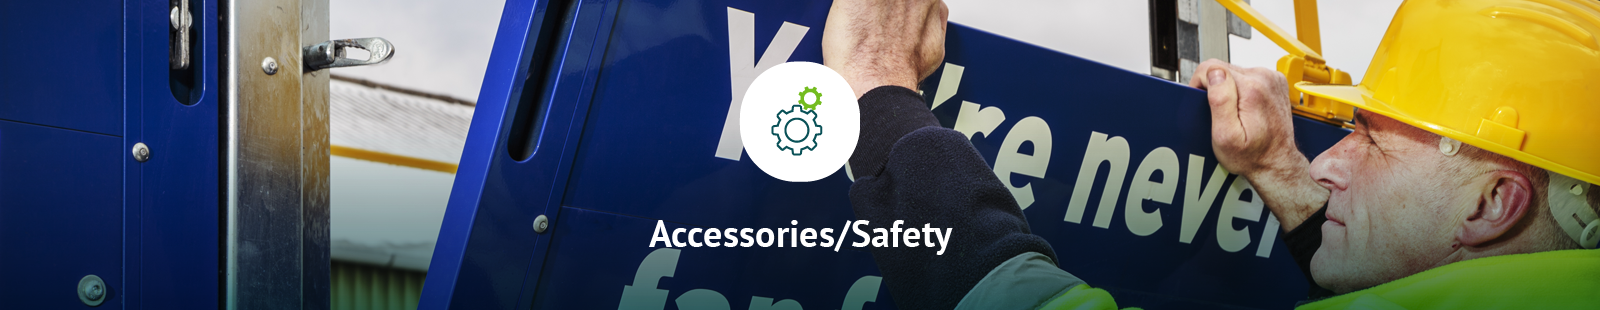 Accessories and Safety Equipment